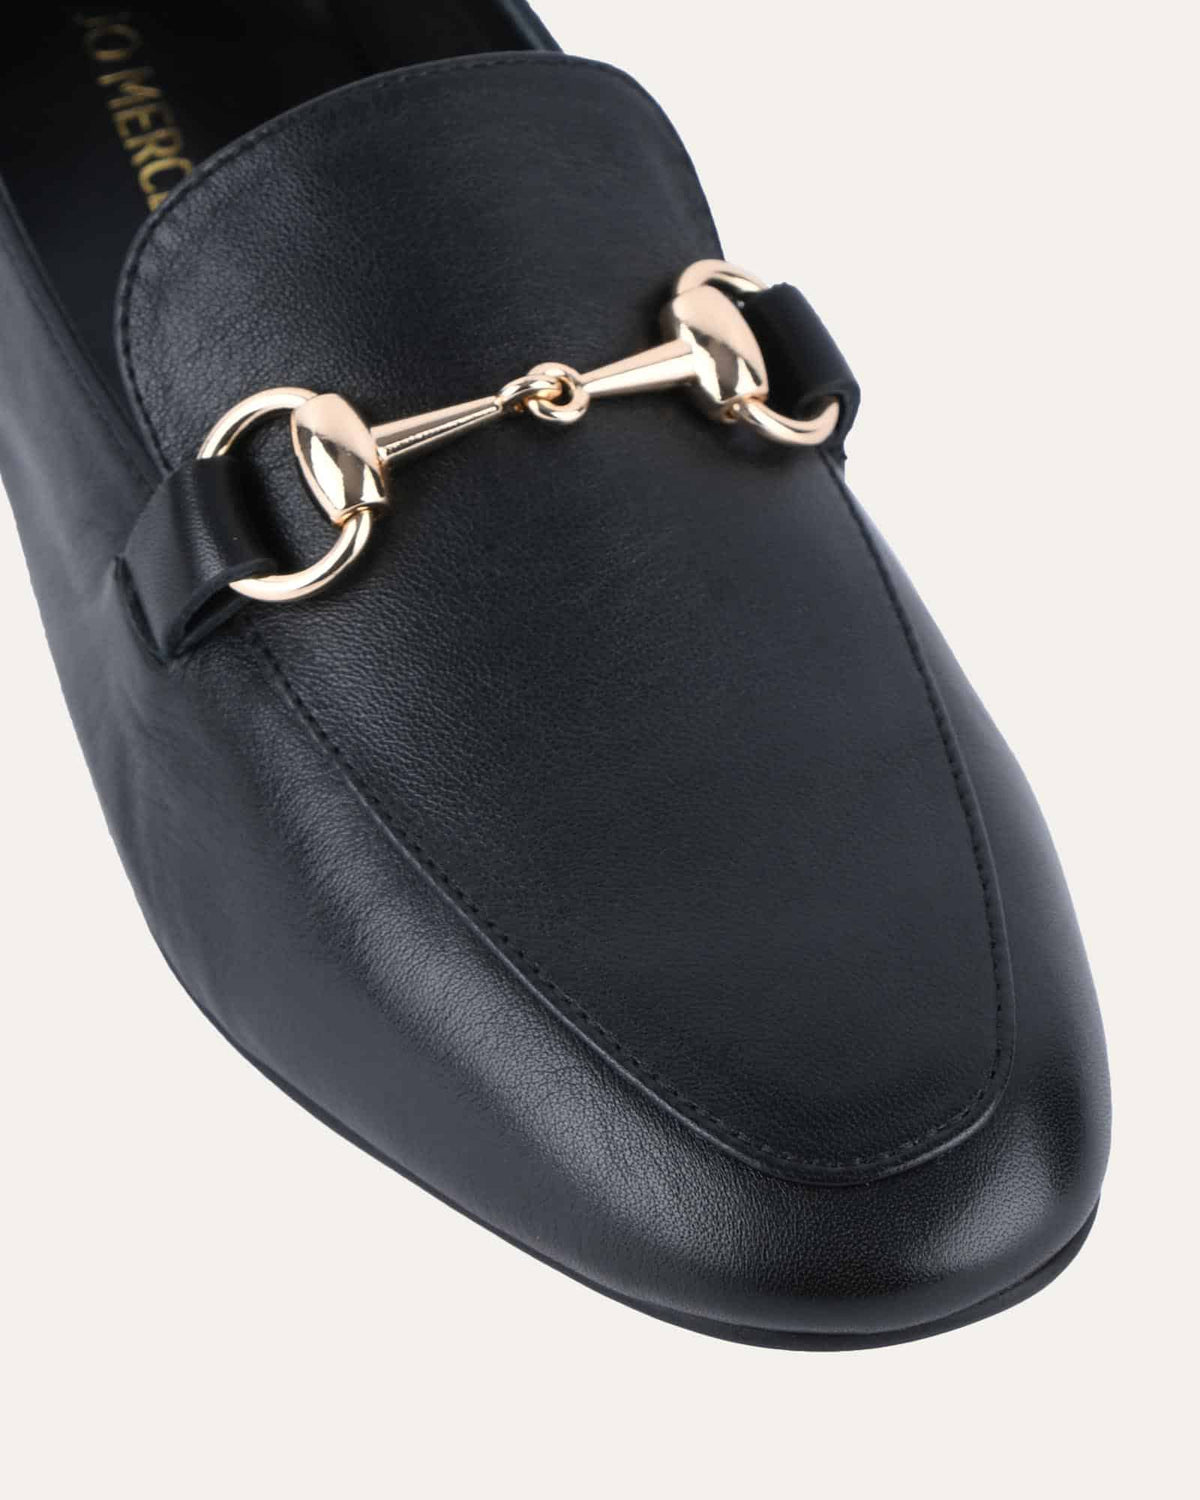 DULANEY LOAFERS BLACK LEATHER